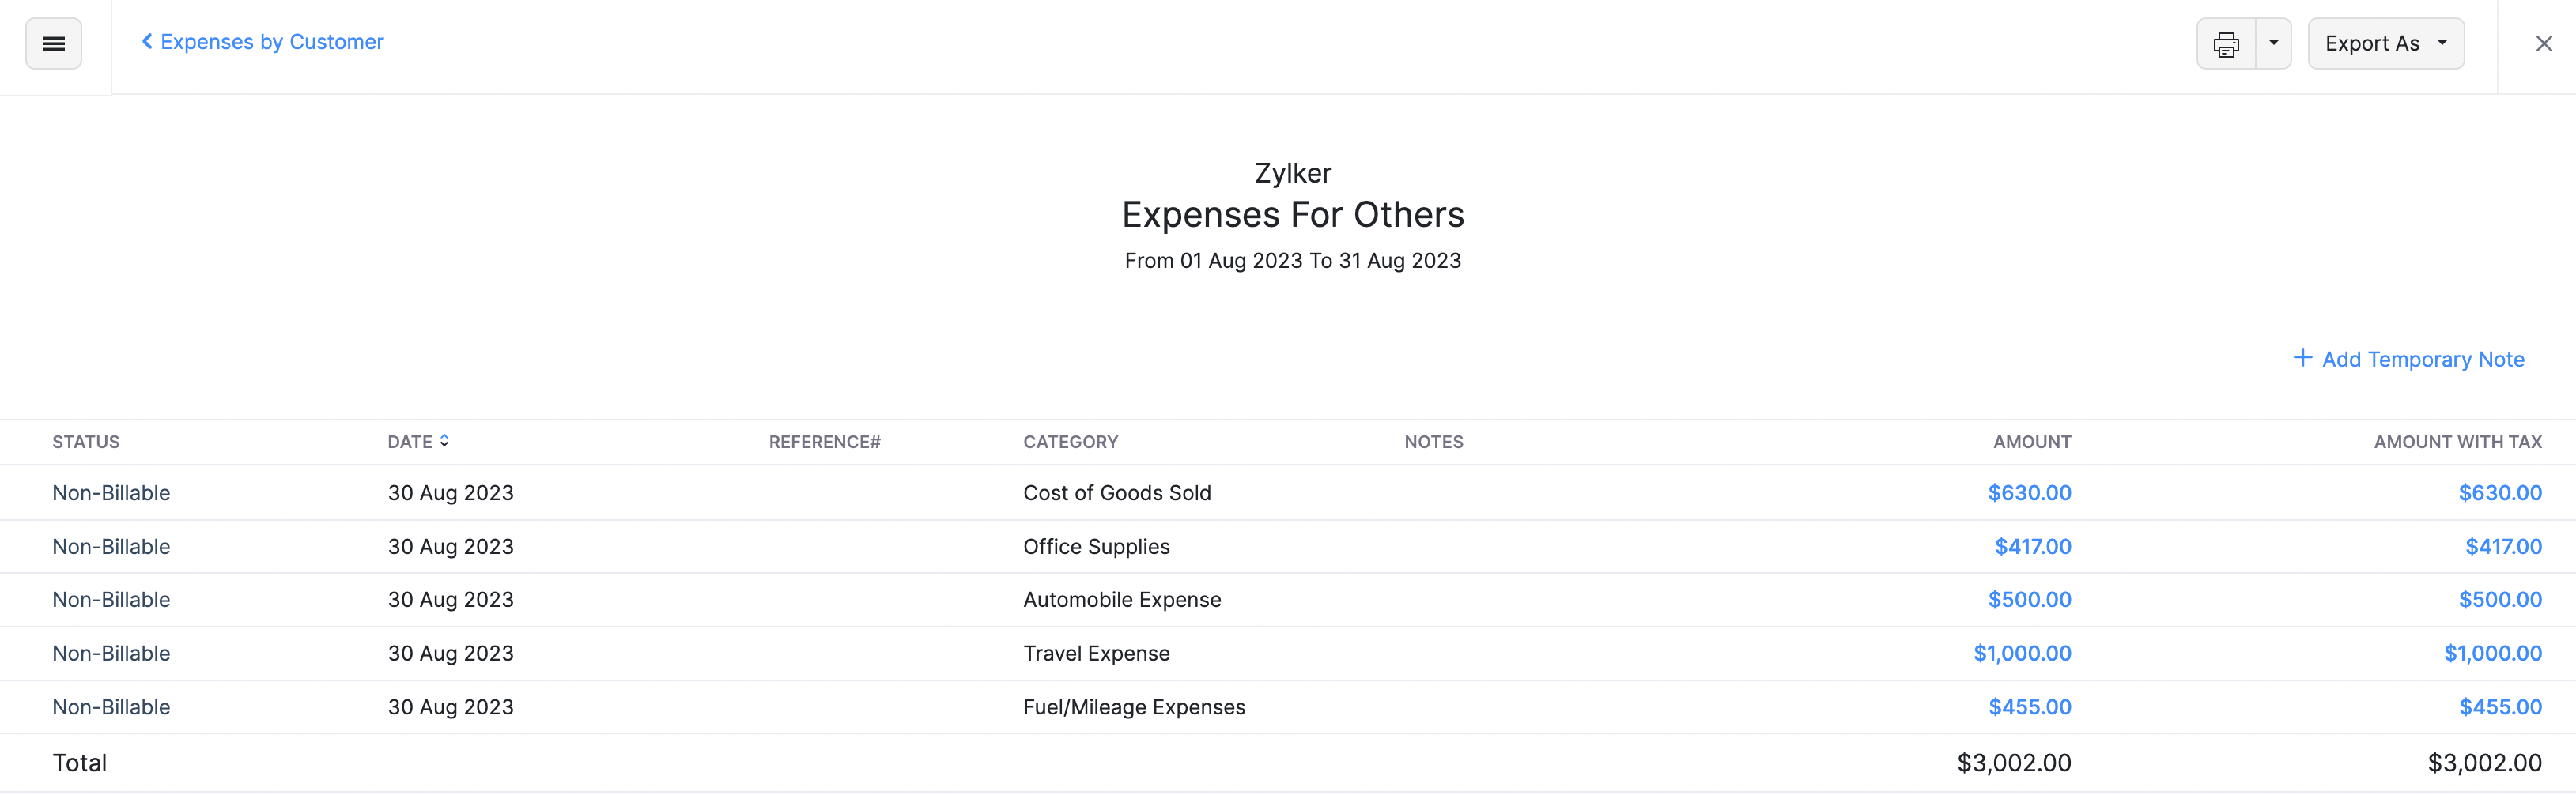 Expense by Customer Report - 2